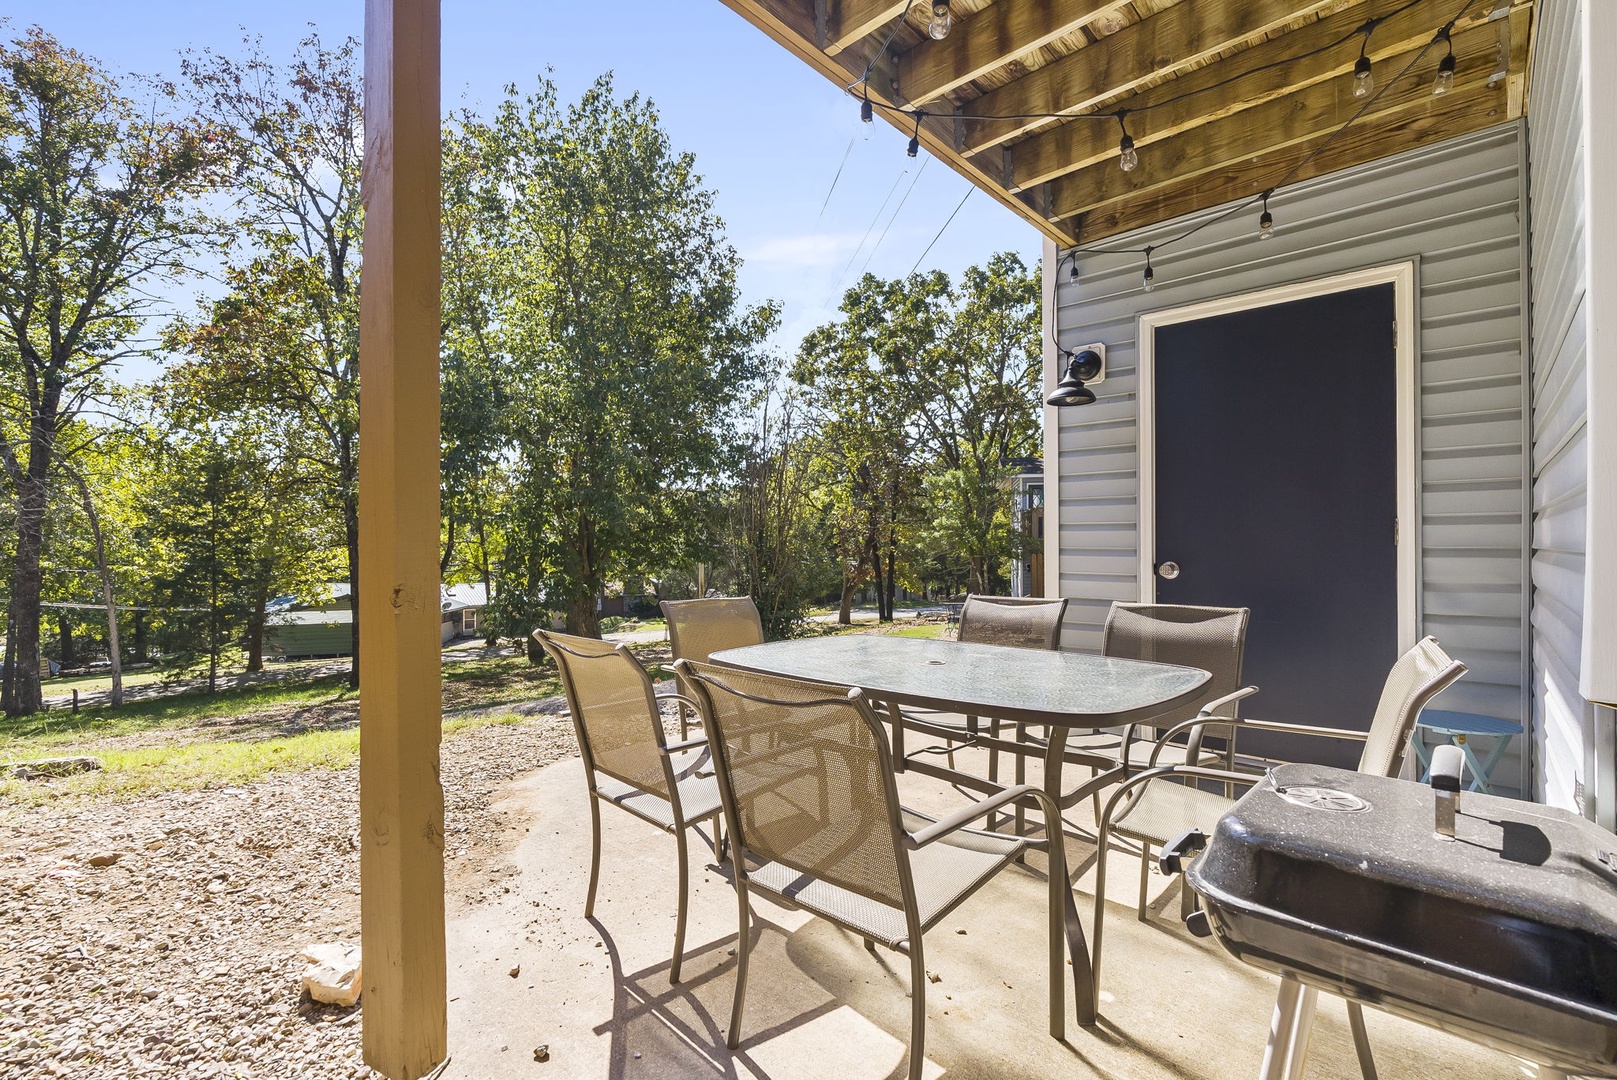 Step out into the fresh air & enjoy the sunny back patio